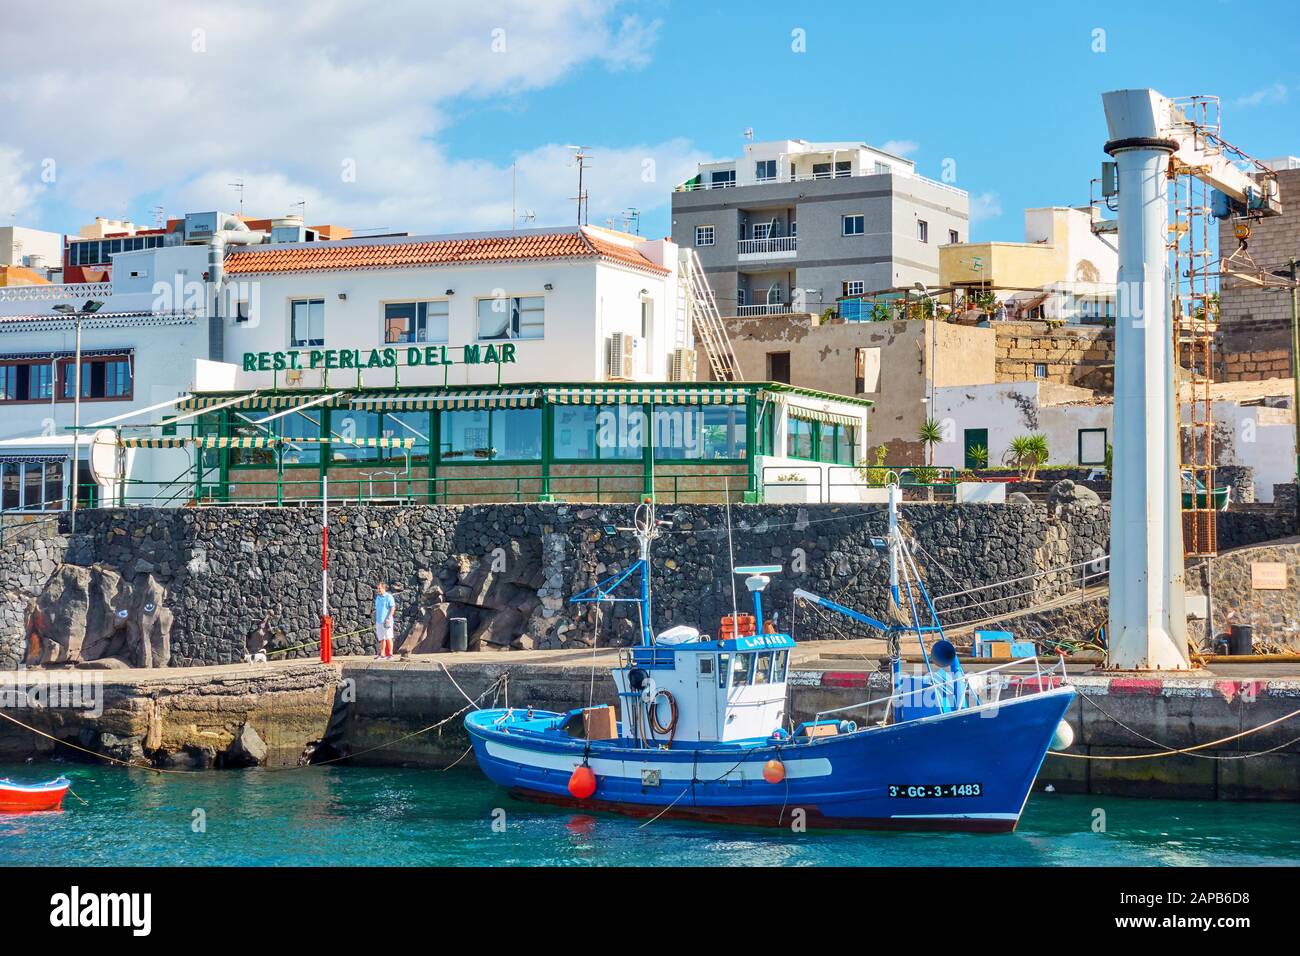 Los Abrigos, Tenerife, Spain - December 16, 2019: Fishing boat and seafood  restaurants in small port in Los Abrigos town, Tenerife Island, The Canarie  Stock Photo - Alamy